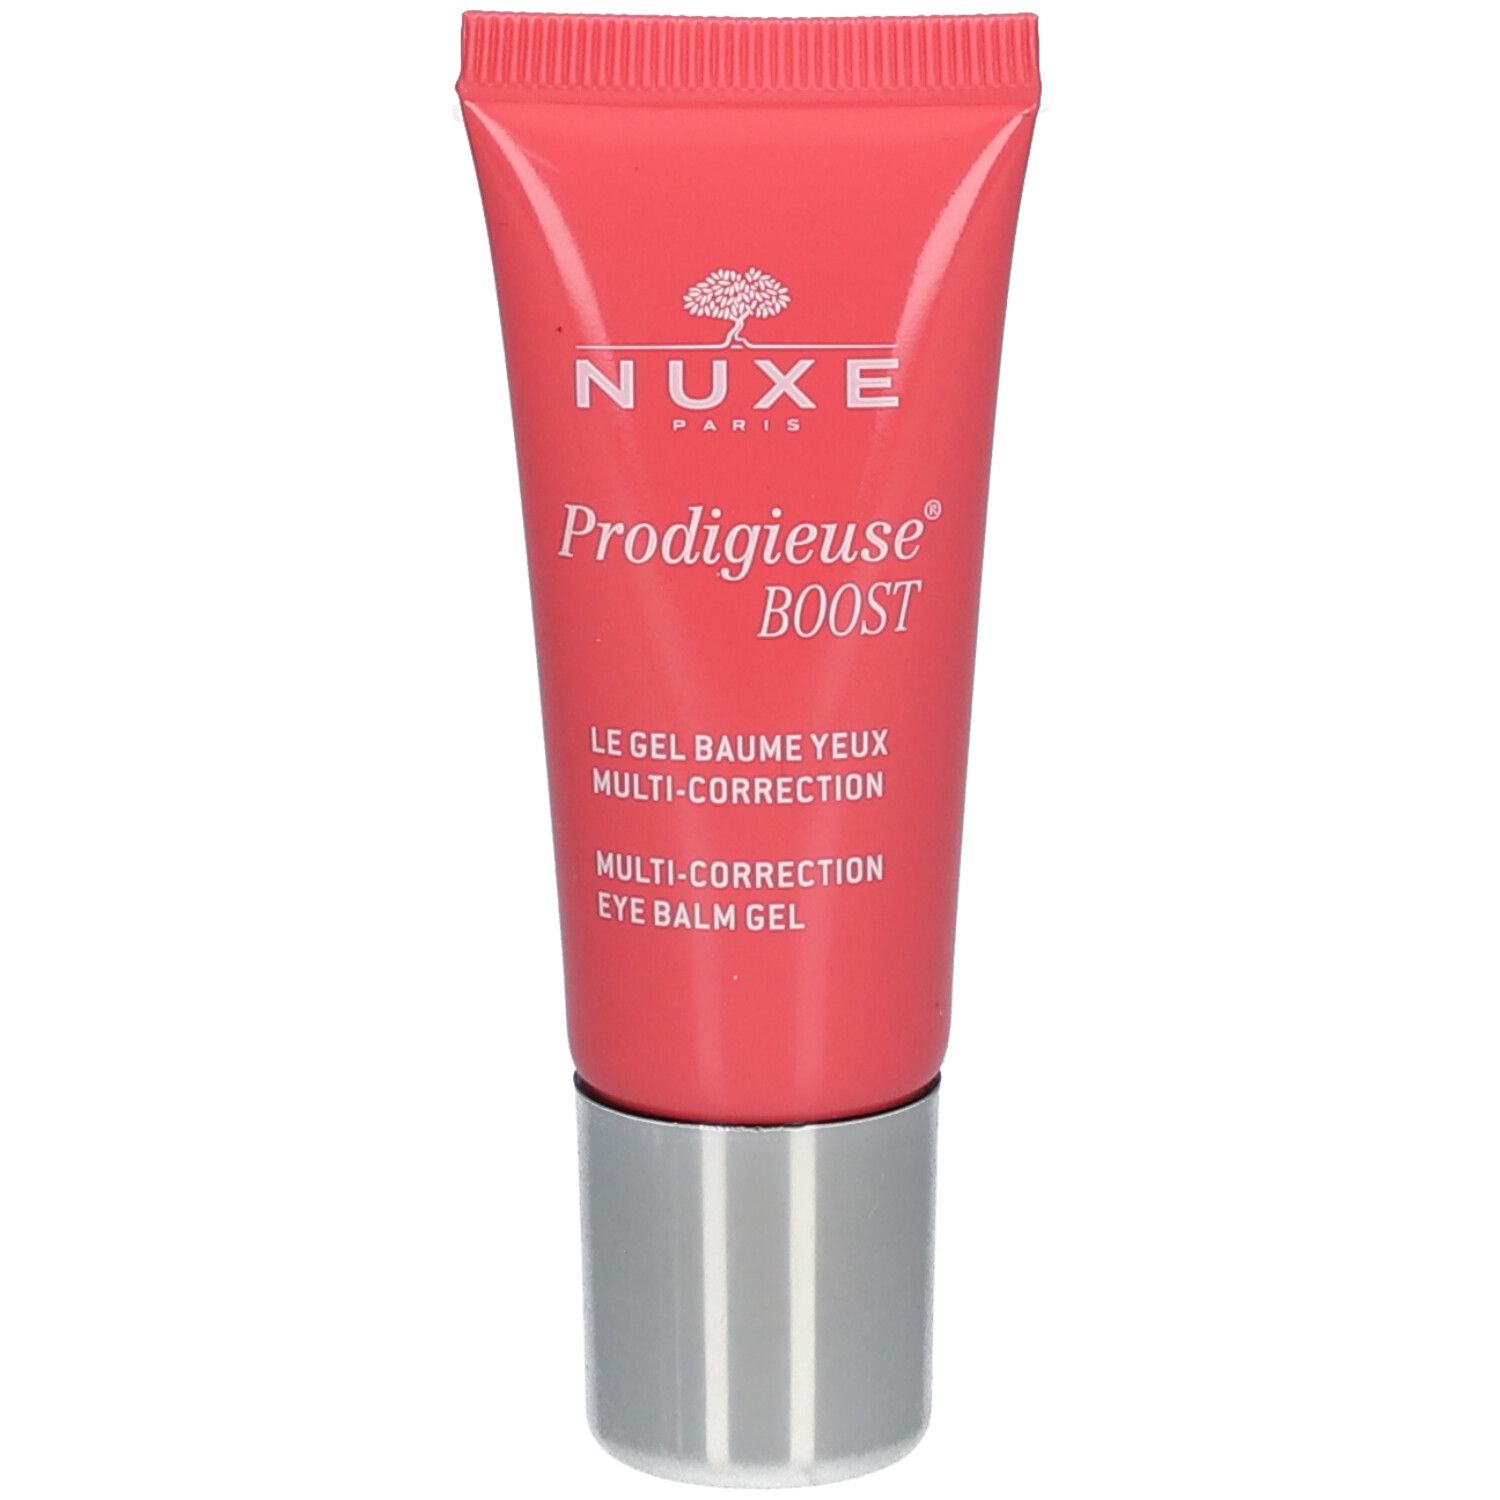 Nuxe Prodigieuse® Boost Le Gel Baume Yeux Multi-Correction 15 ml gel